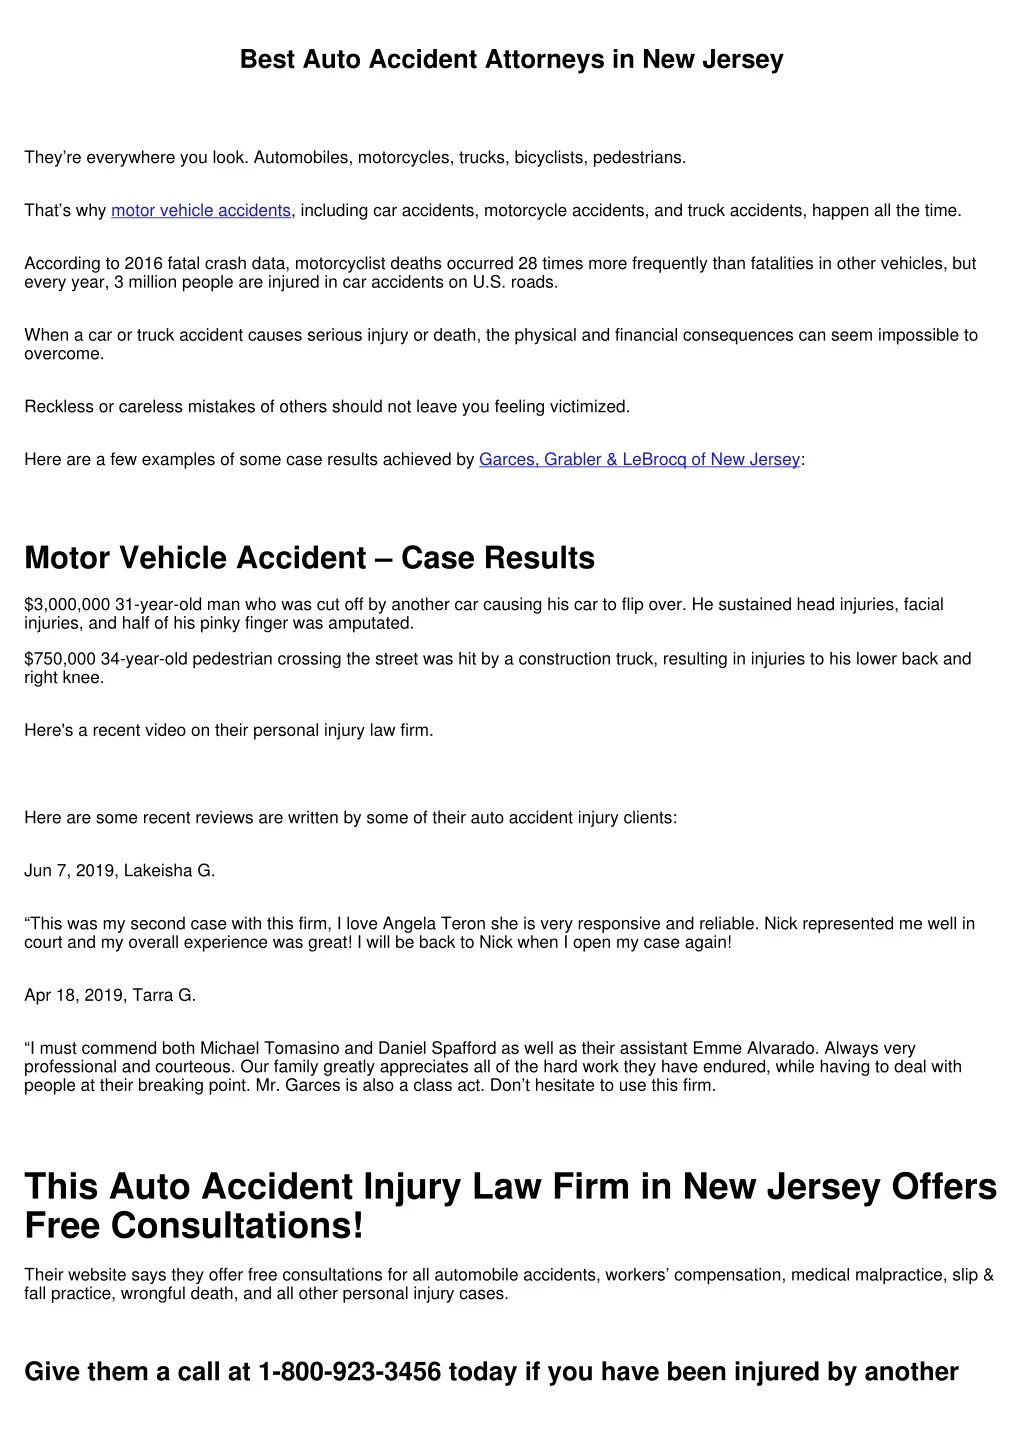 best auto accident attorneys in new jersey n.